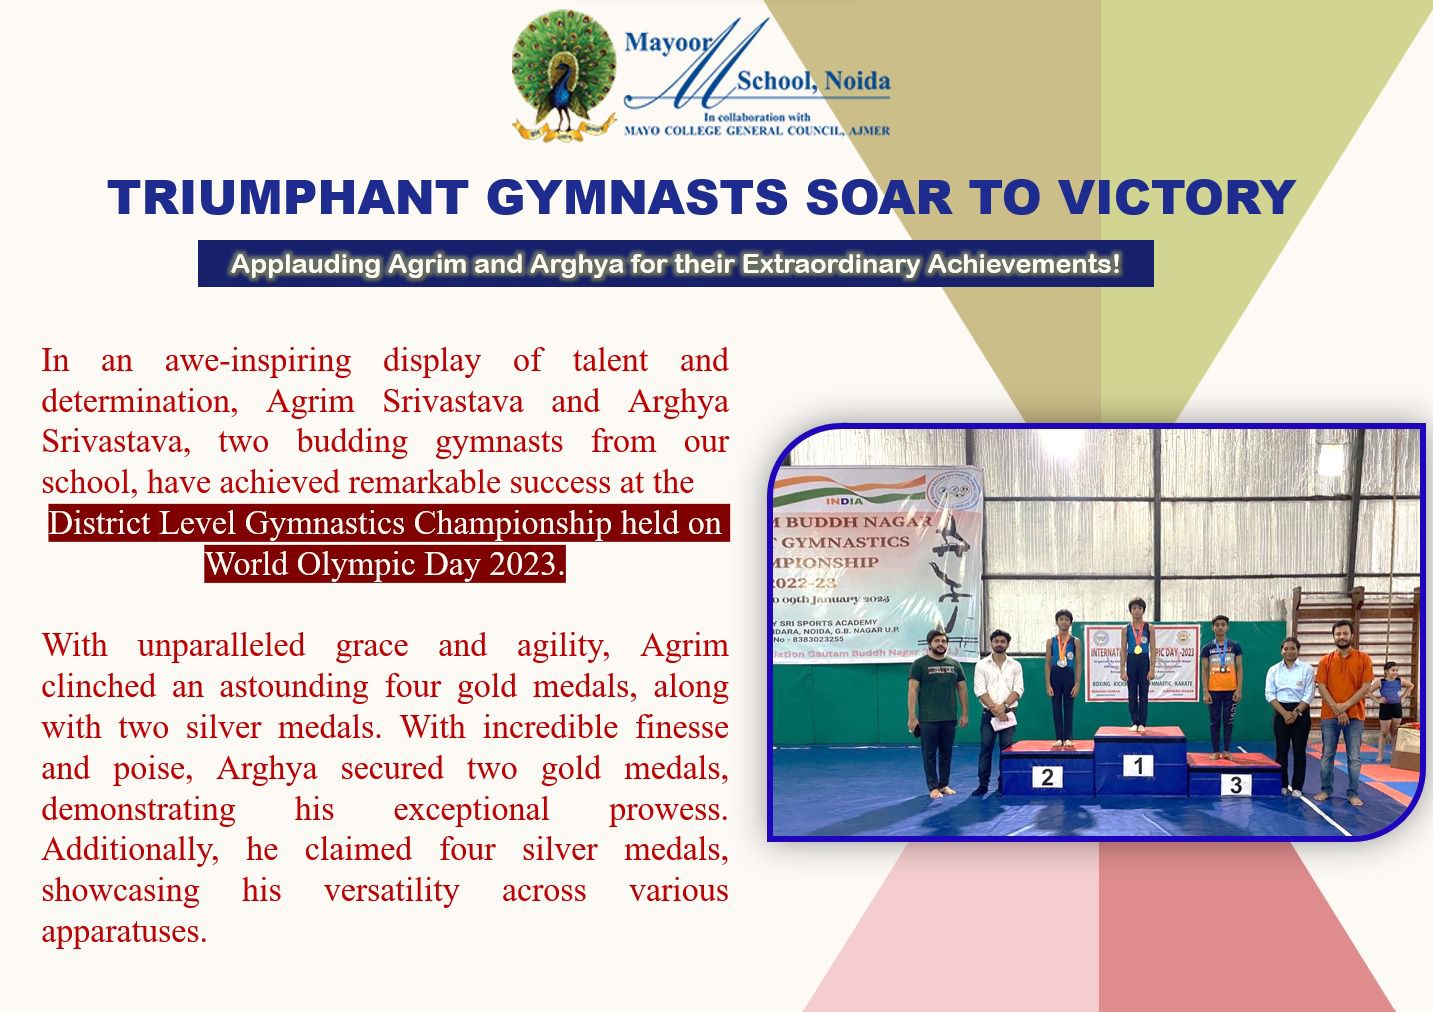 Triumphant Gymnasts Soar to Victory: Applauding Agrim and Arghya for their Extraordinary Achievements!